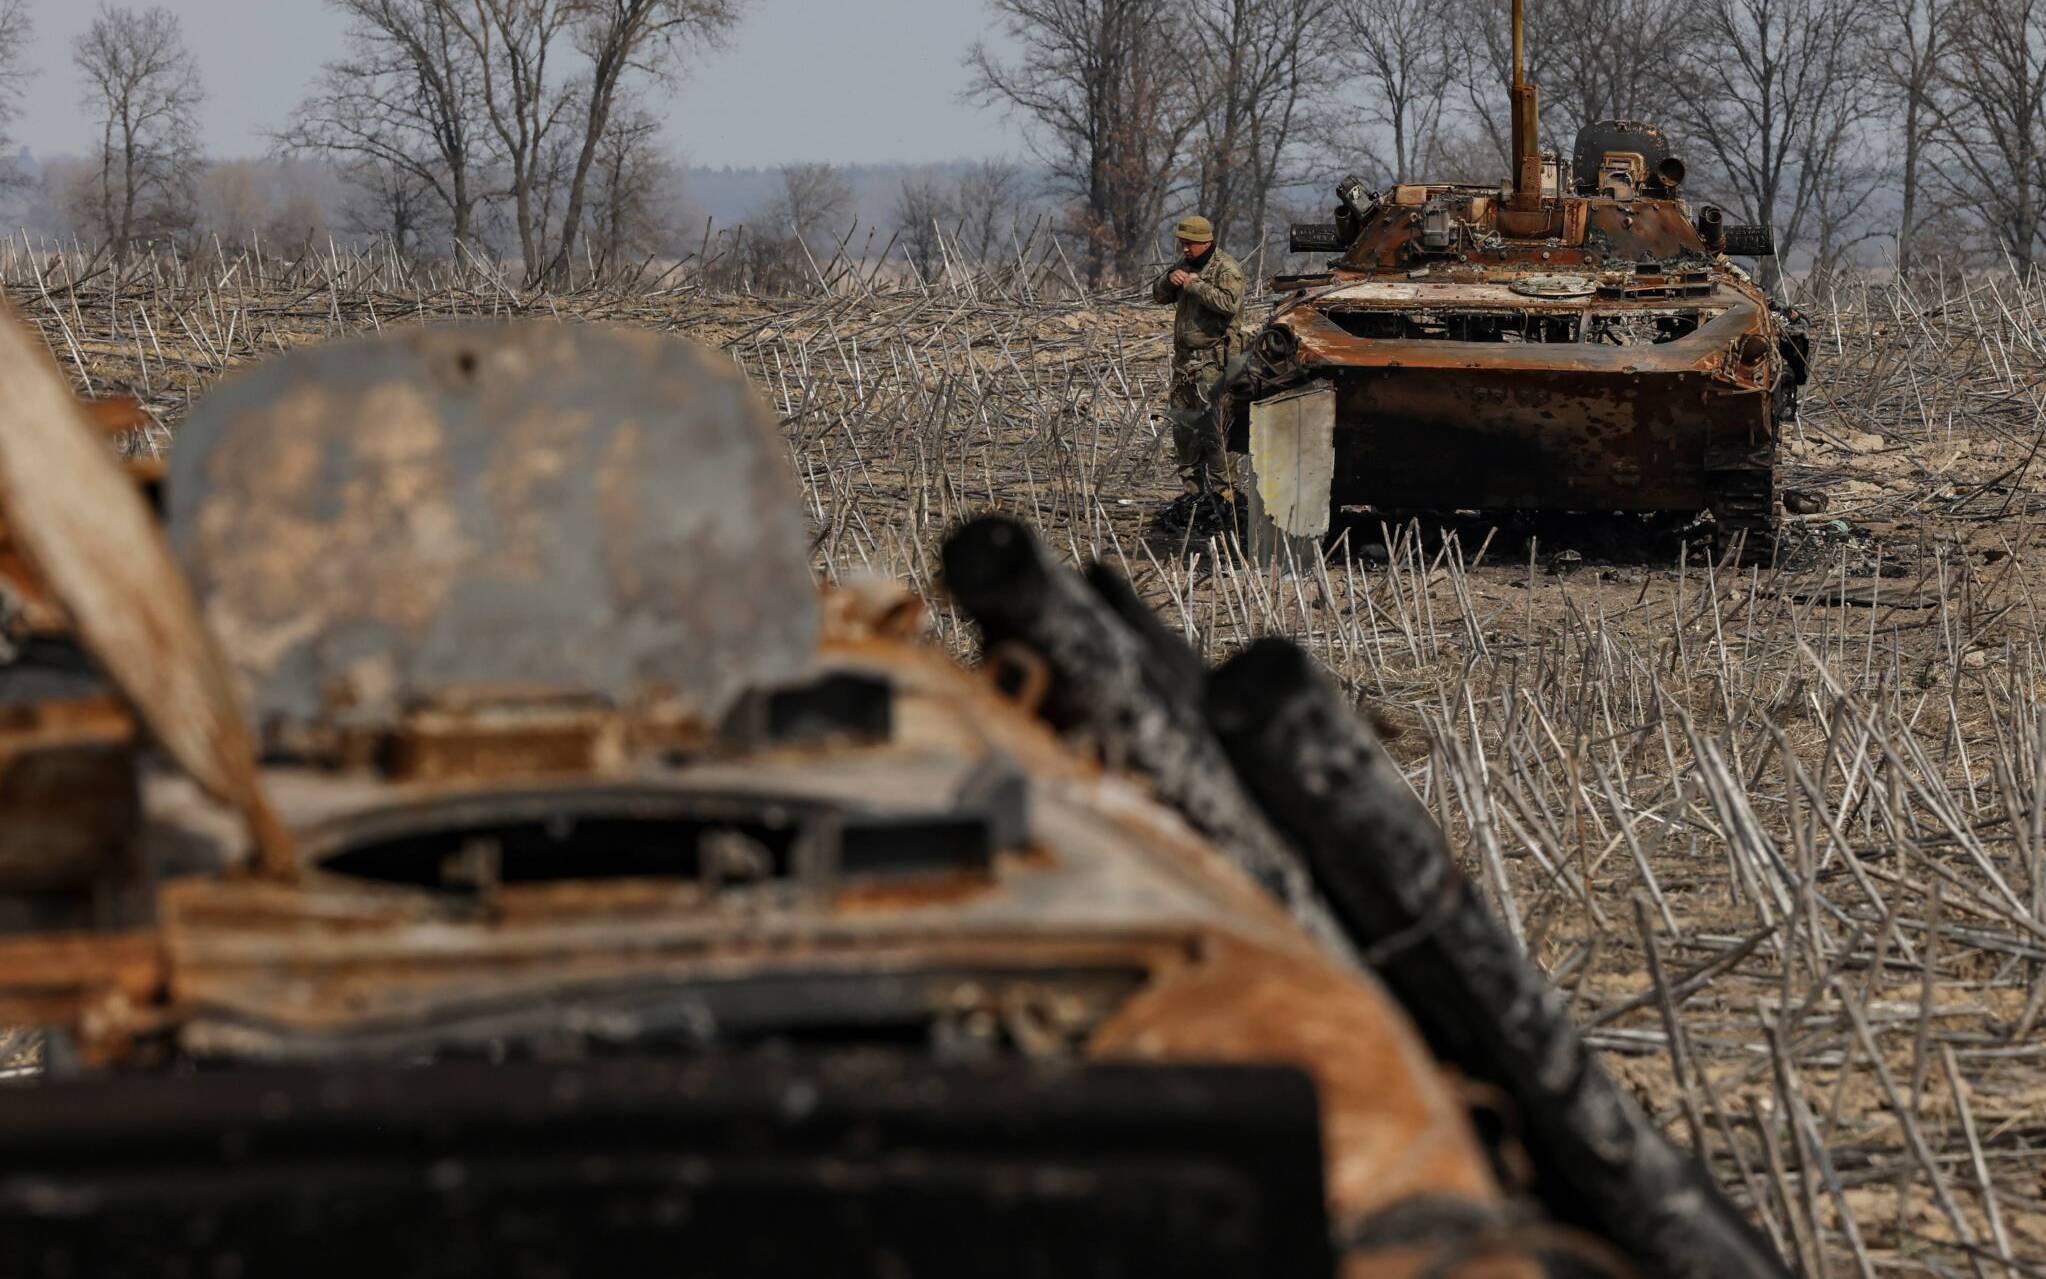 A Ukrainian soldier checks the wreckage of a burnt Russian tank on the outskirts of Kyiv, on March 31, 2022, amid Russian invasion of Ukraine. (Photo by RONALDO SCHEMIDT / AFP)